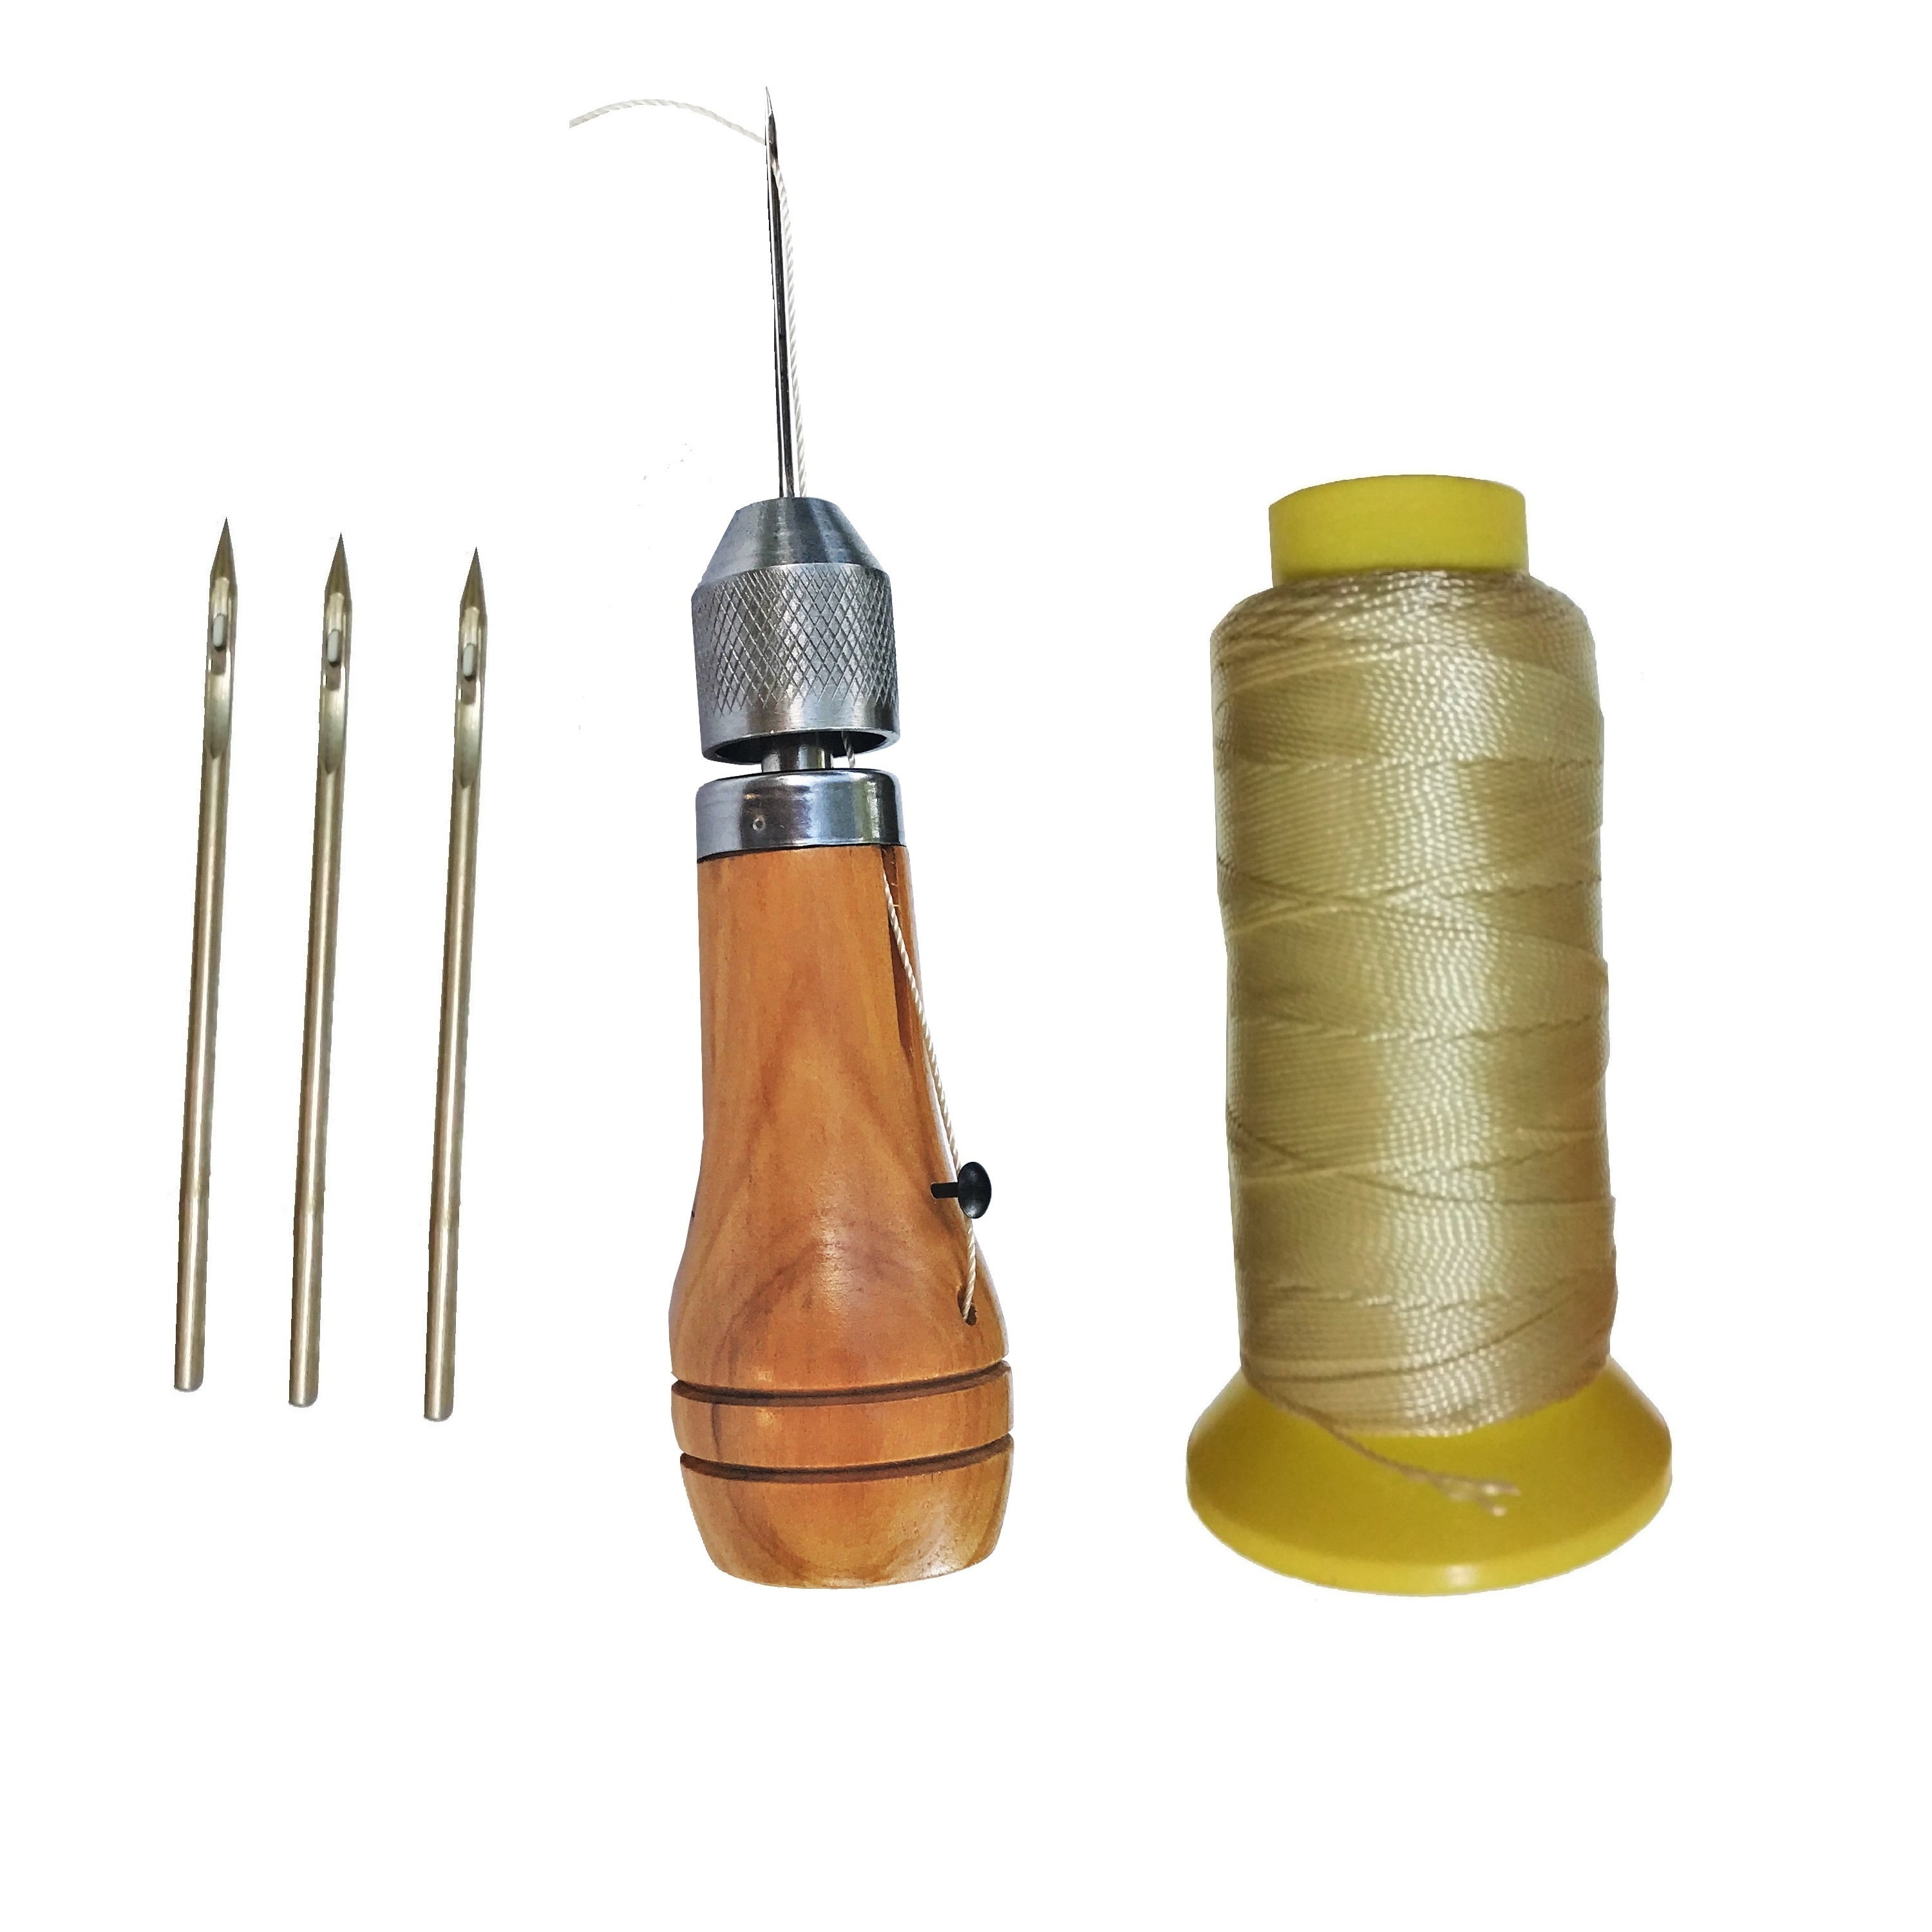 29Pcs Leather Repair Kit, Leather Hand Sewing Craft Tools with Upholstery  Needles, Thread,Tape Measure, Drilling Awl for Leather Canvas Sewing